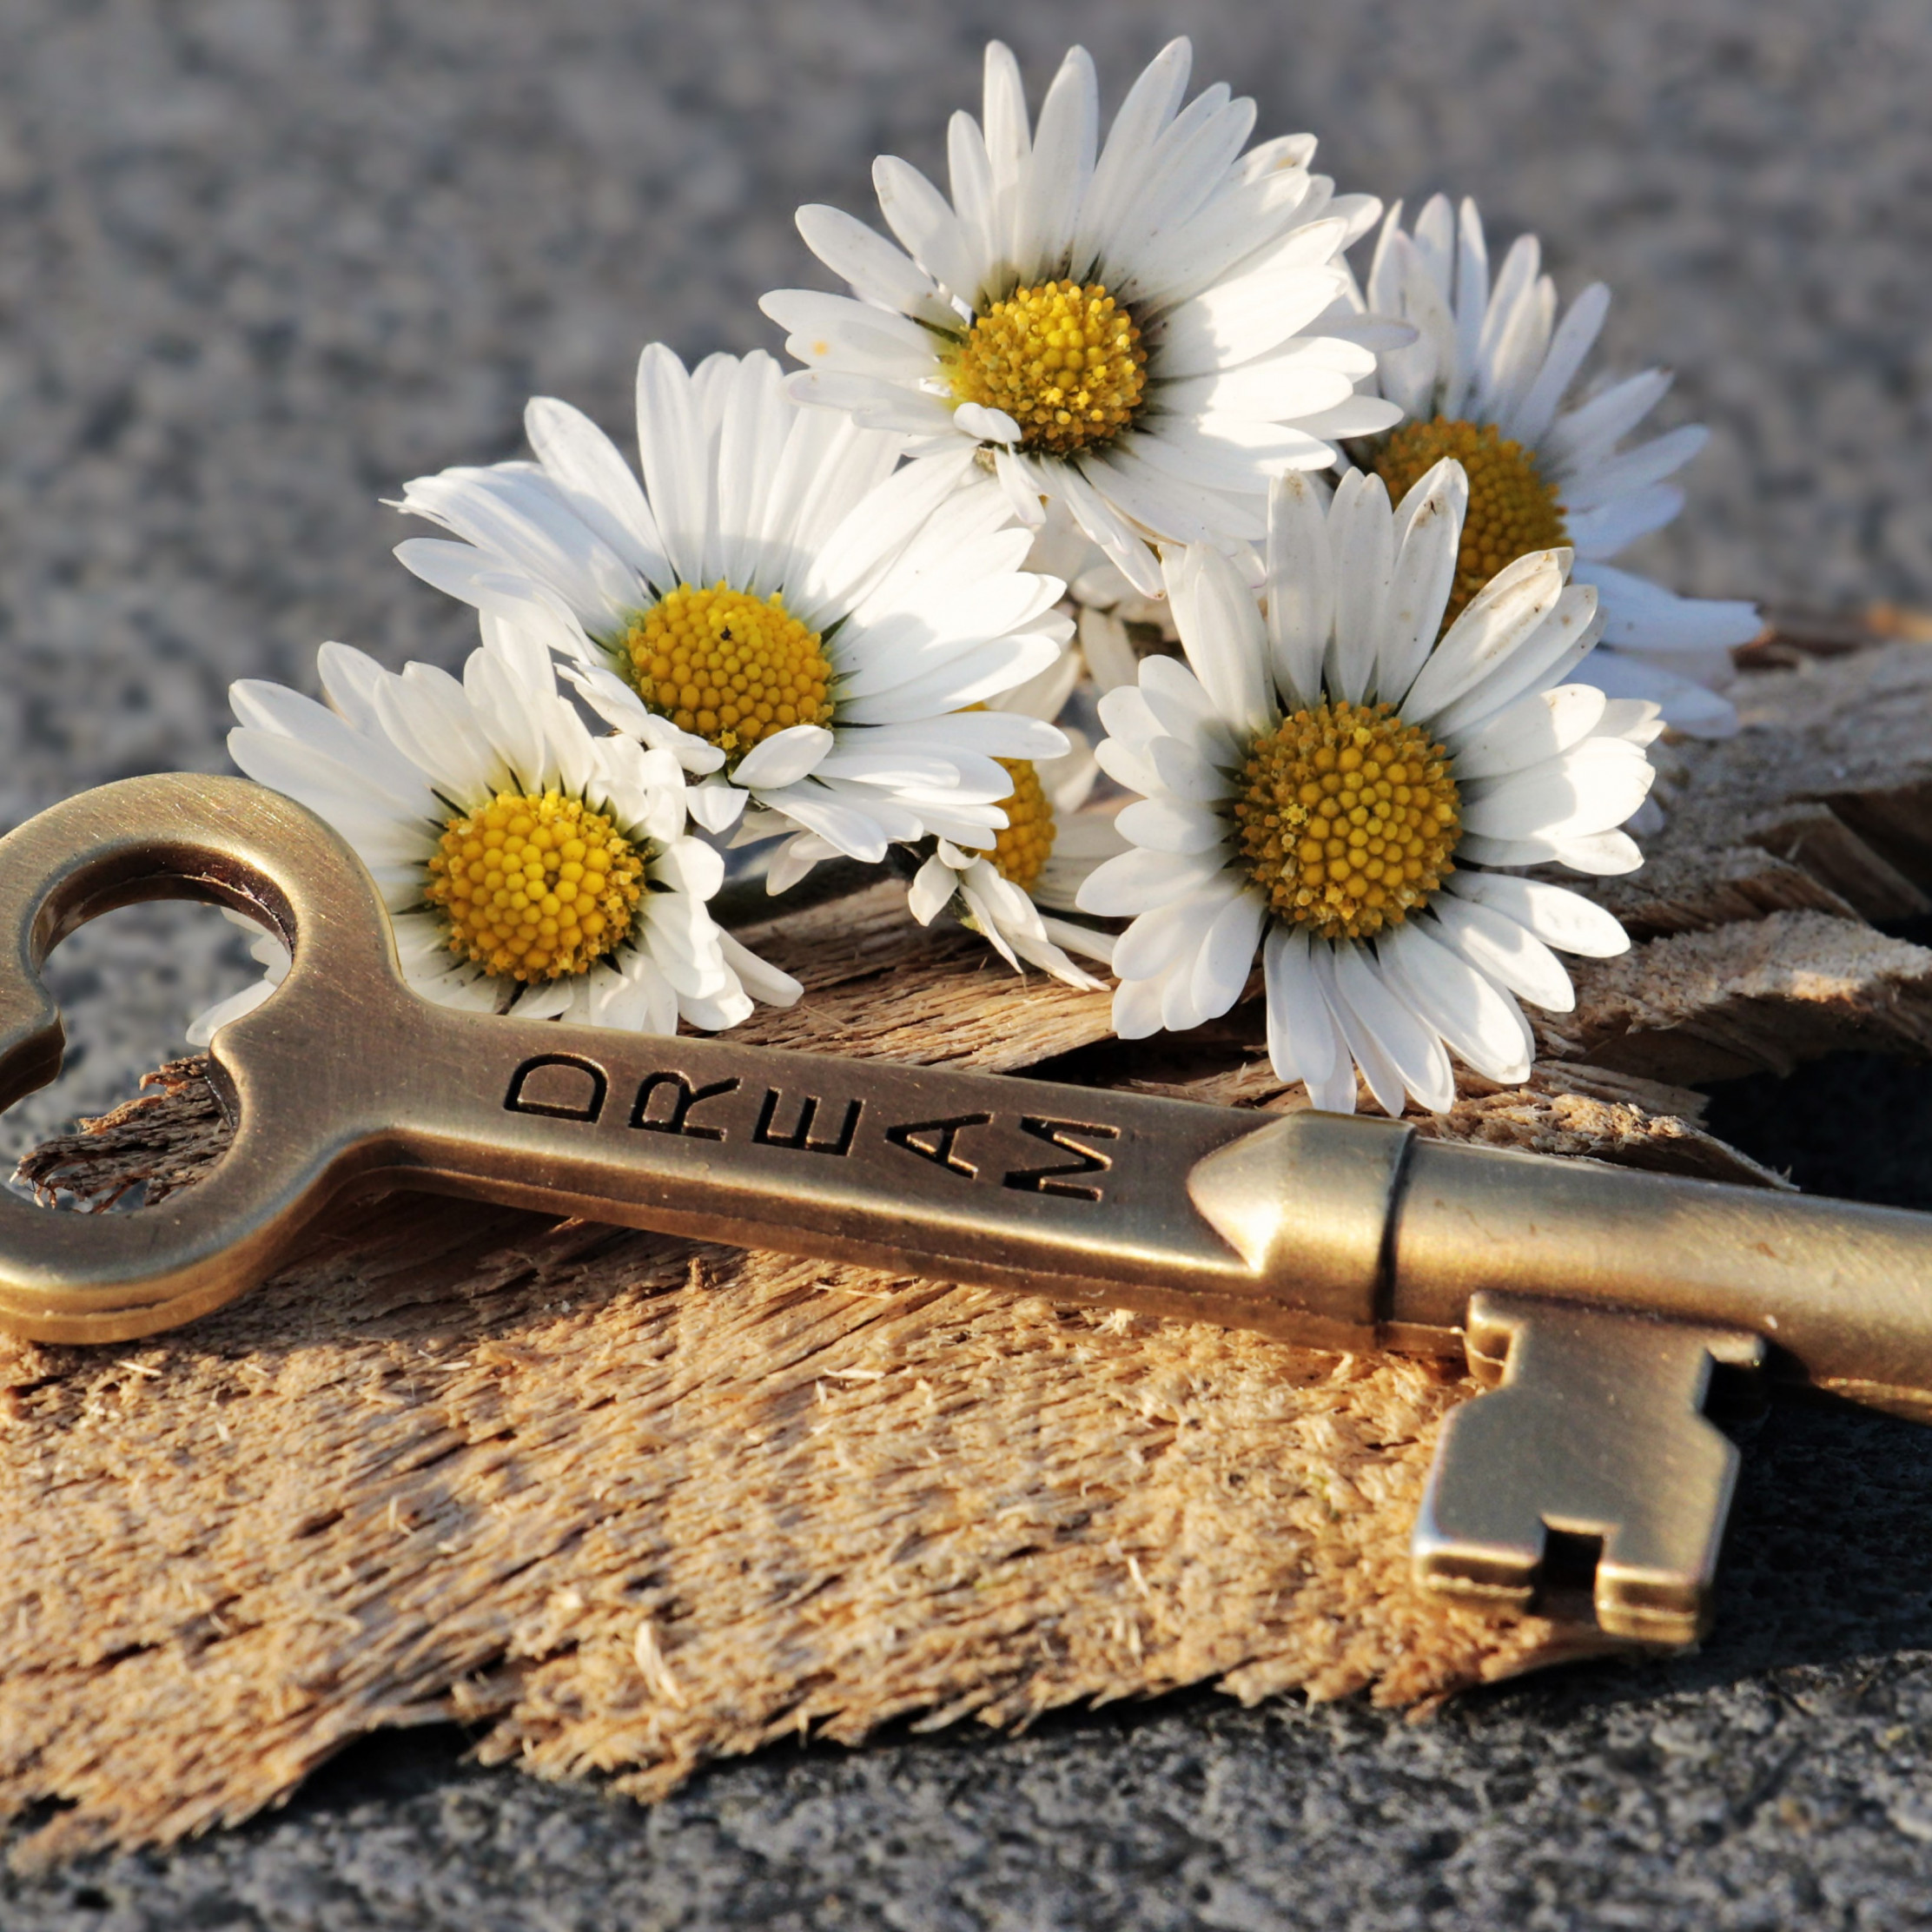 The dreams key and daisy flowers wallpaper 2224x2224